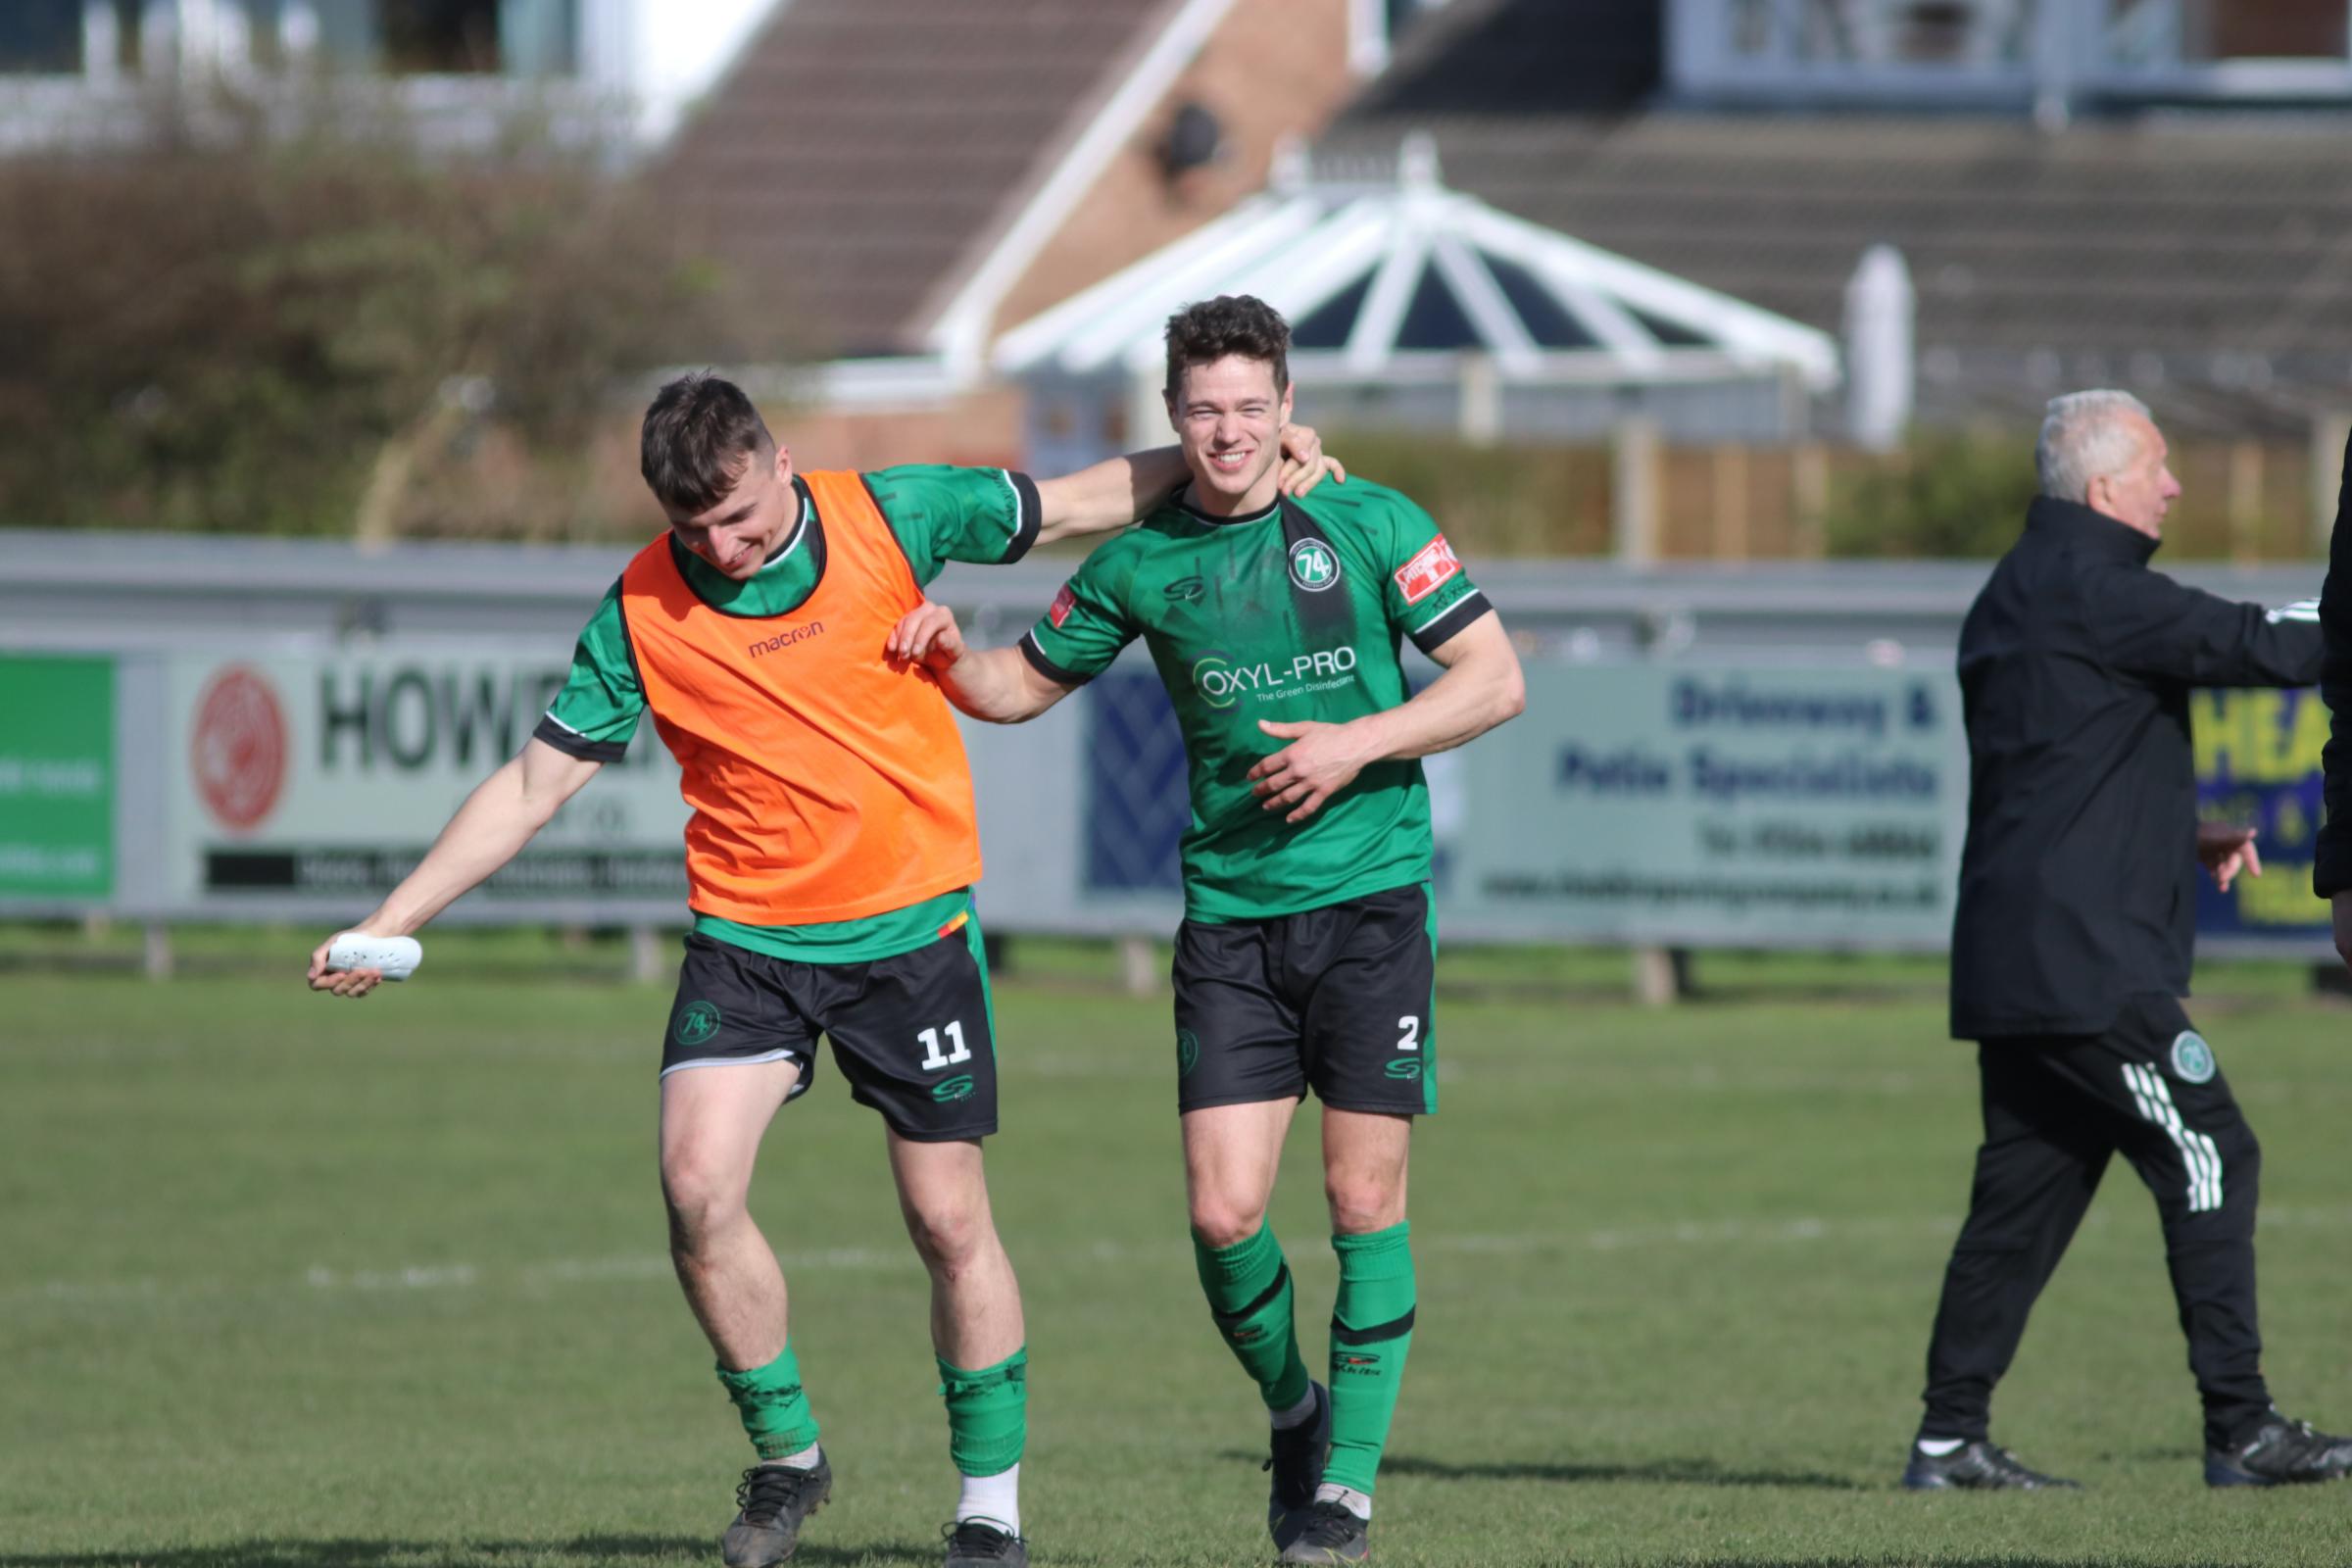 Jack Irlam with Mike Koral after the final whistle, 1874 Northwich 7 Market Drayton Town 0. Pictures: Xenia Simpson Photography